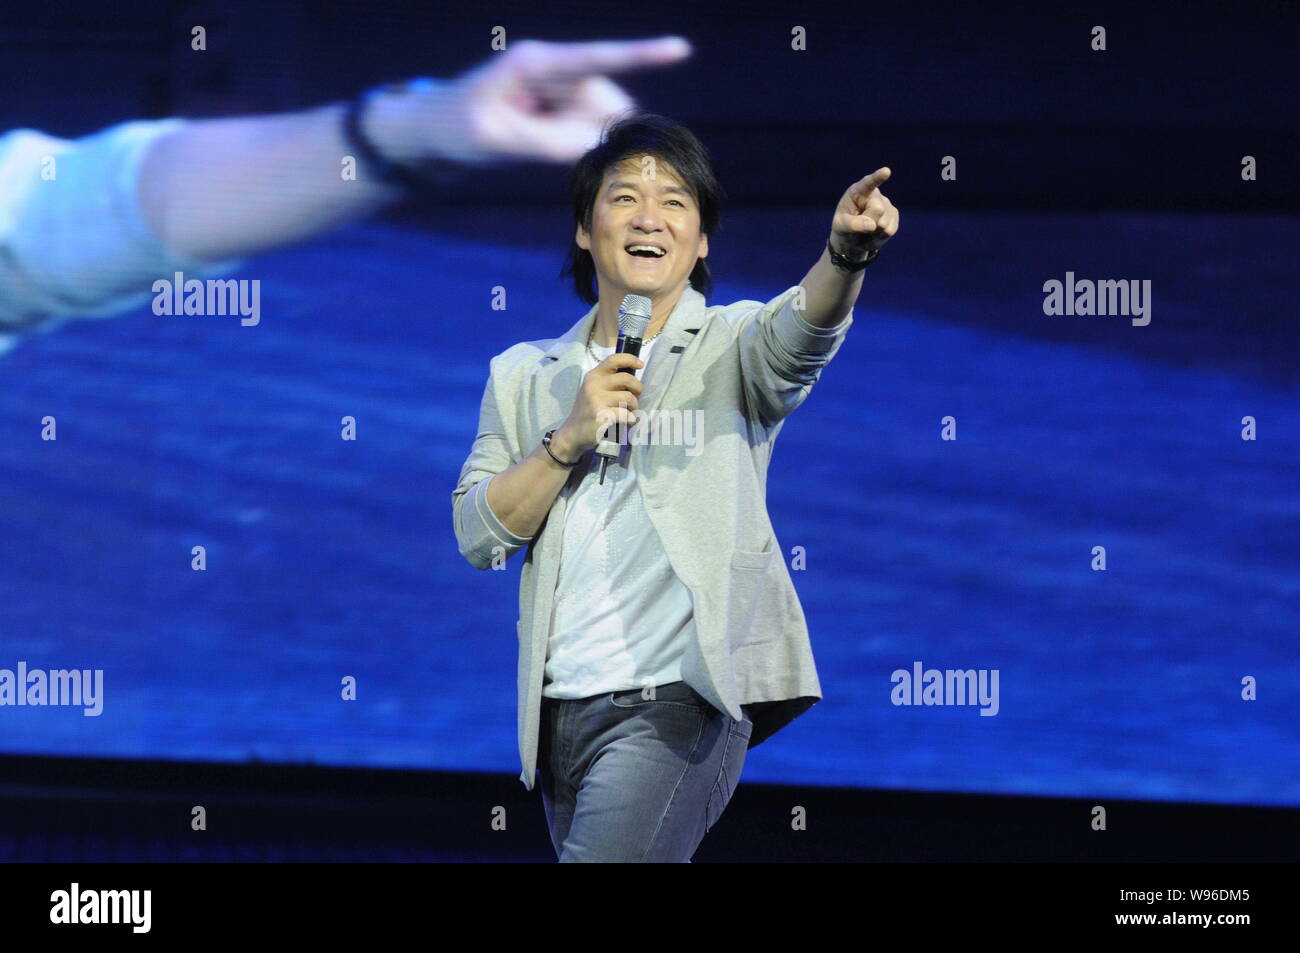 Taiwanese singer Emil Chau performs at a promotional activity in Hangzhou, east Chinas Zhejiang Province, 4 June 2012. Stock Photo